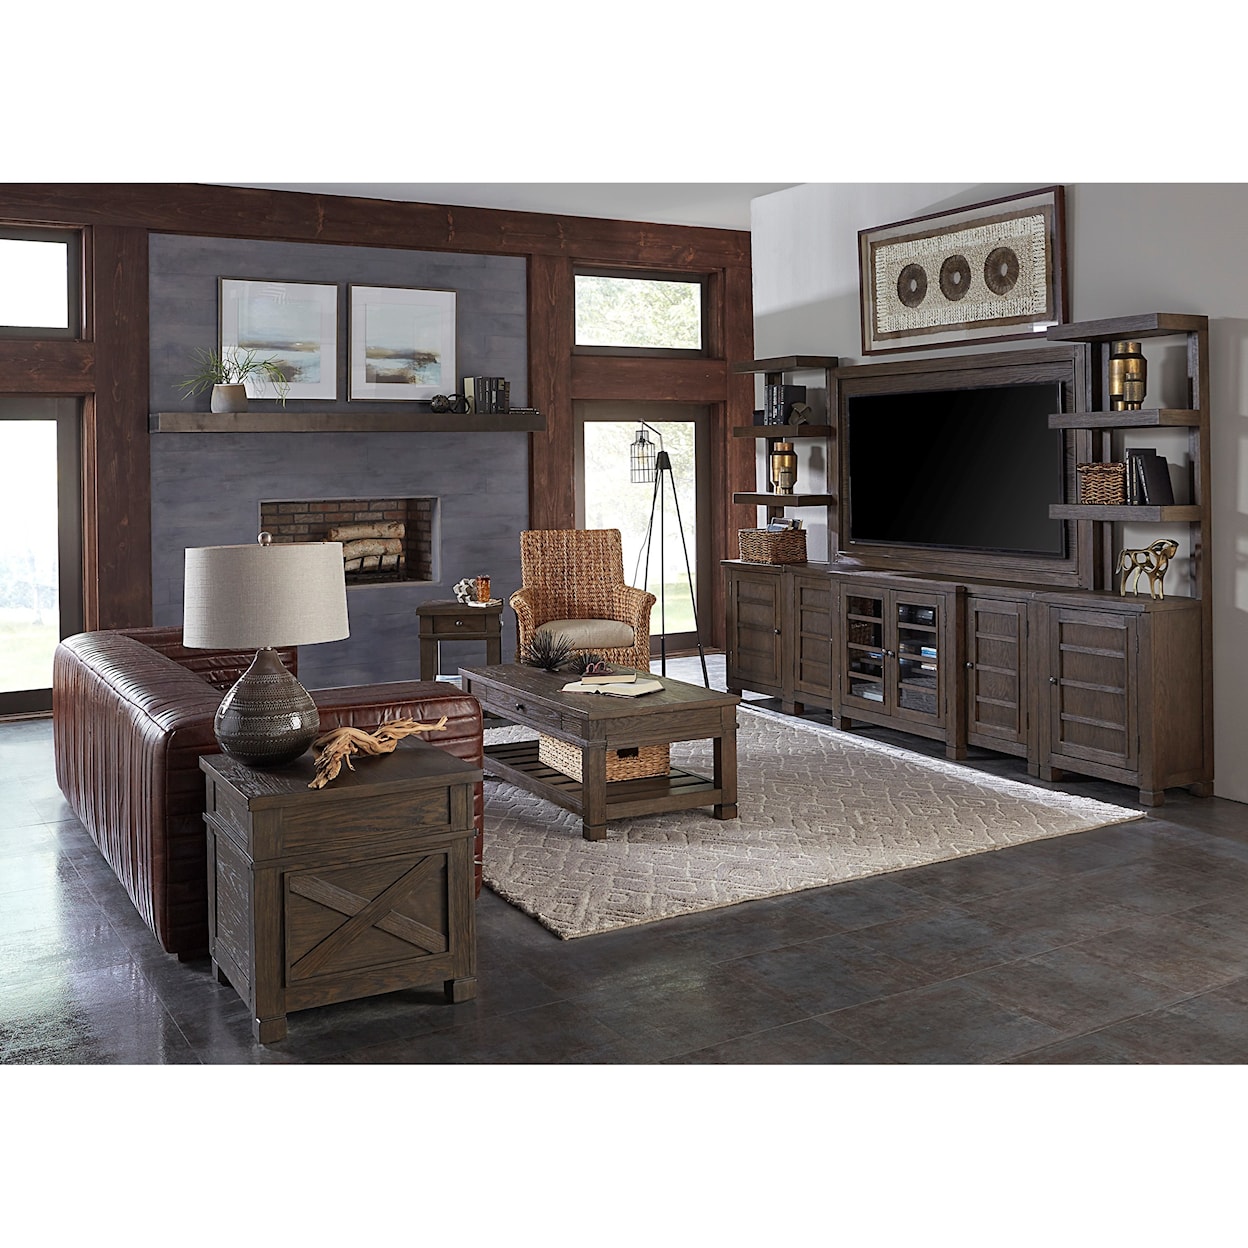 Aspenhome Tolsted 75" Console with TV Backer